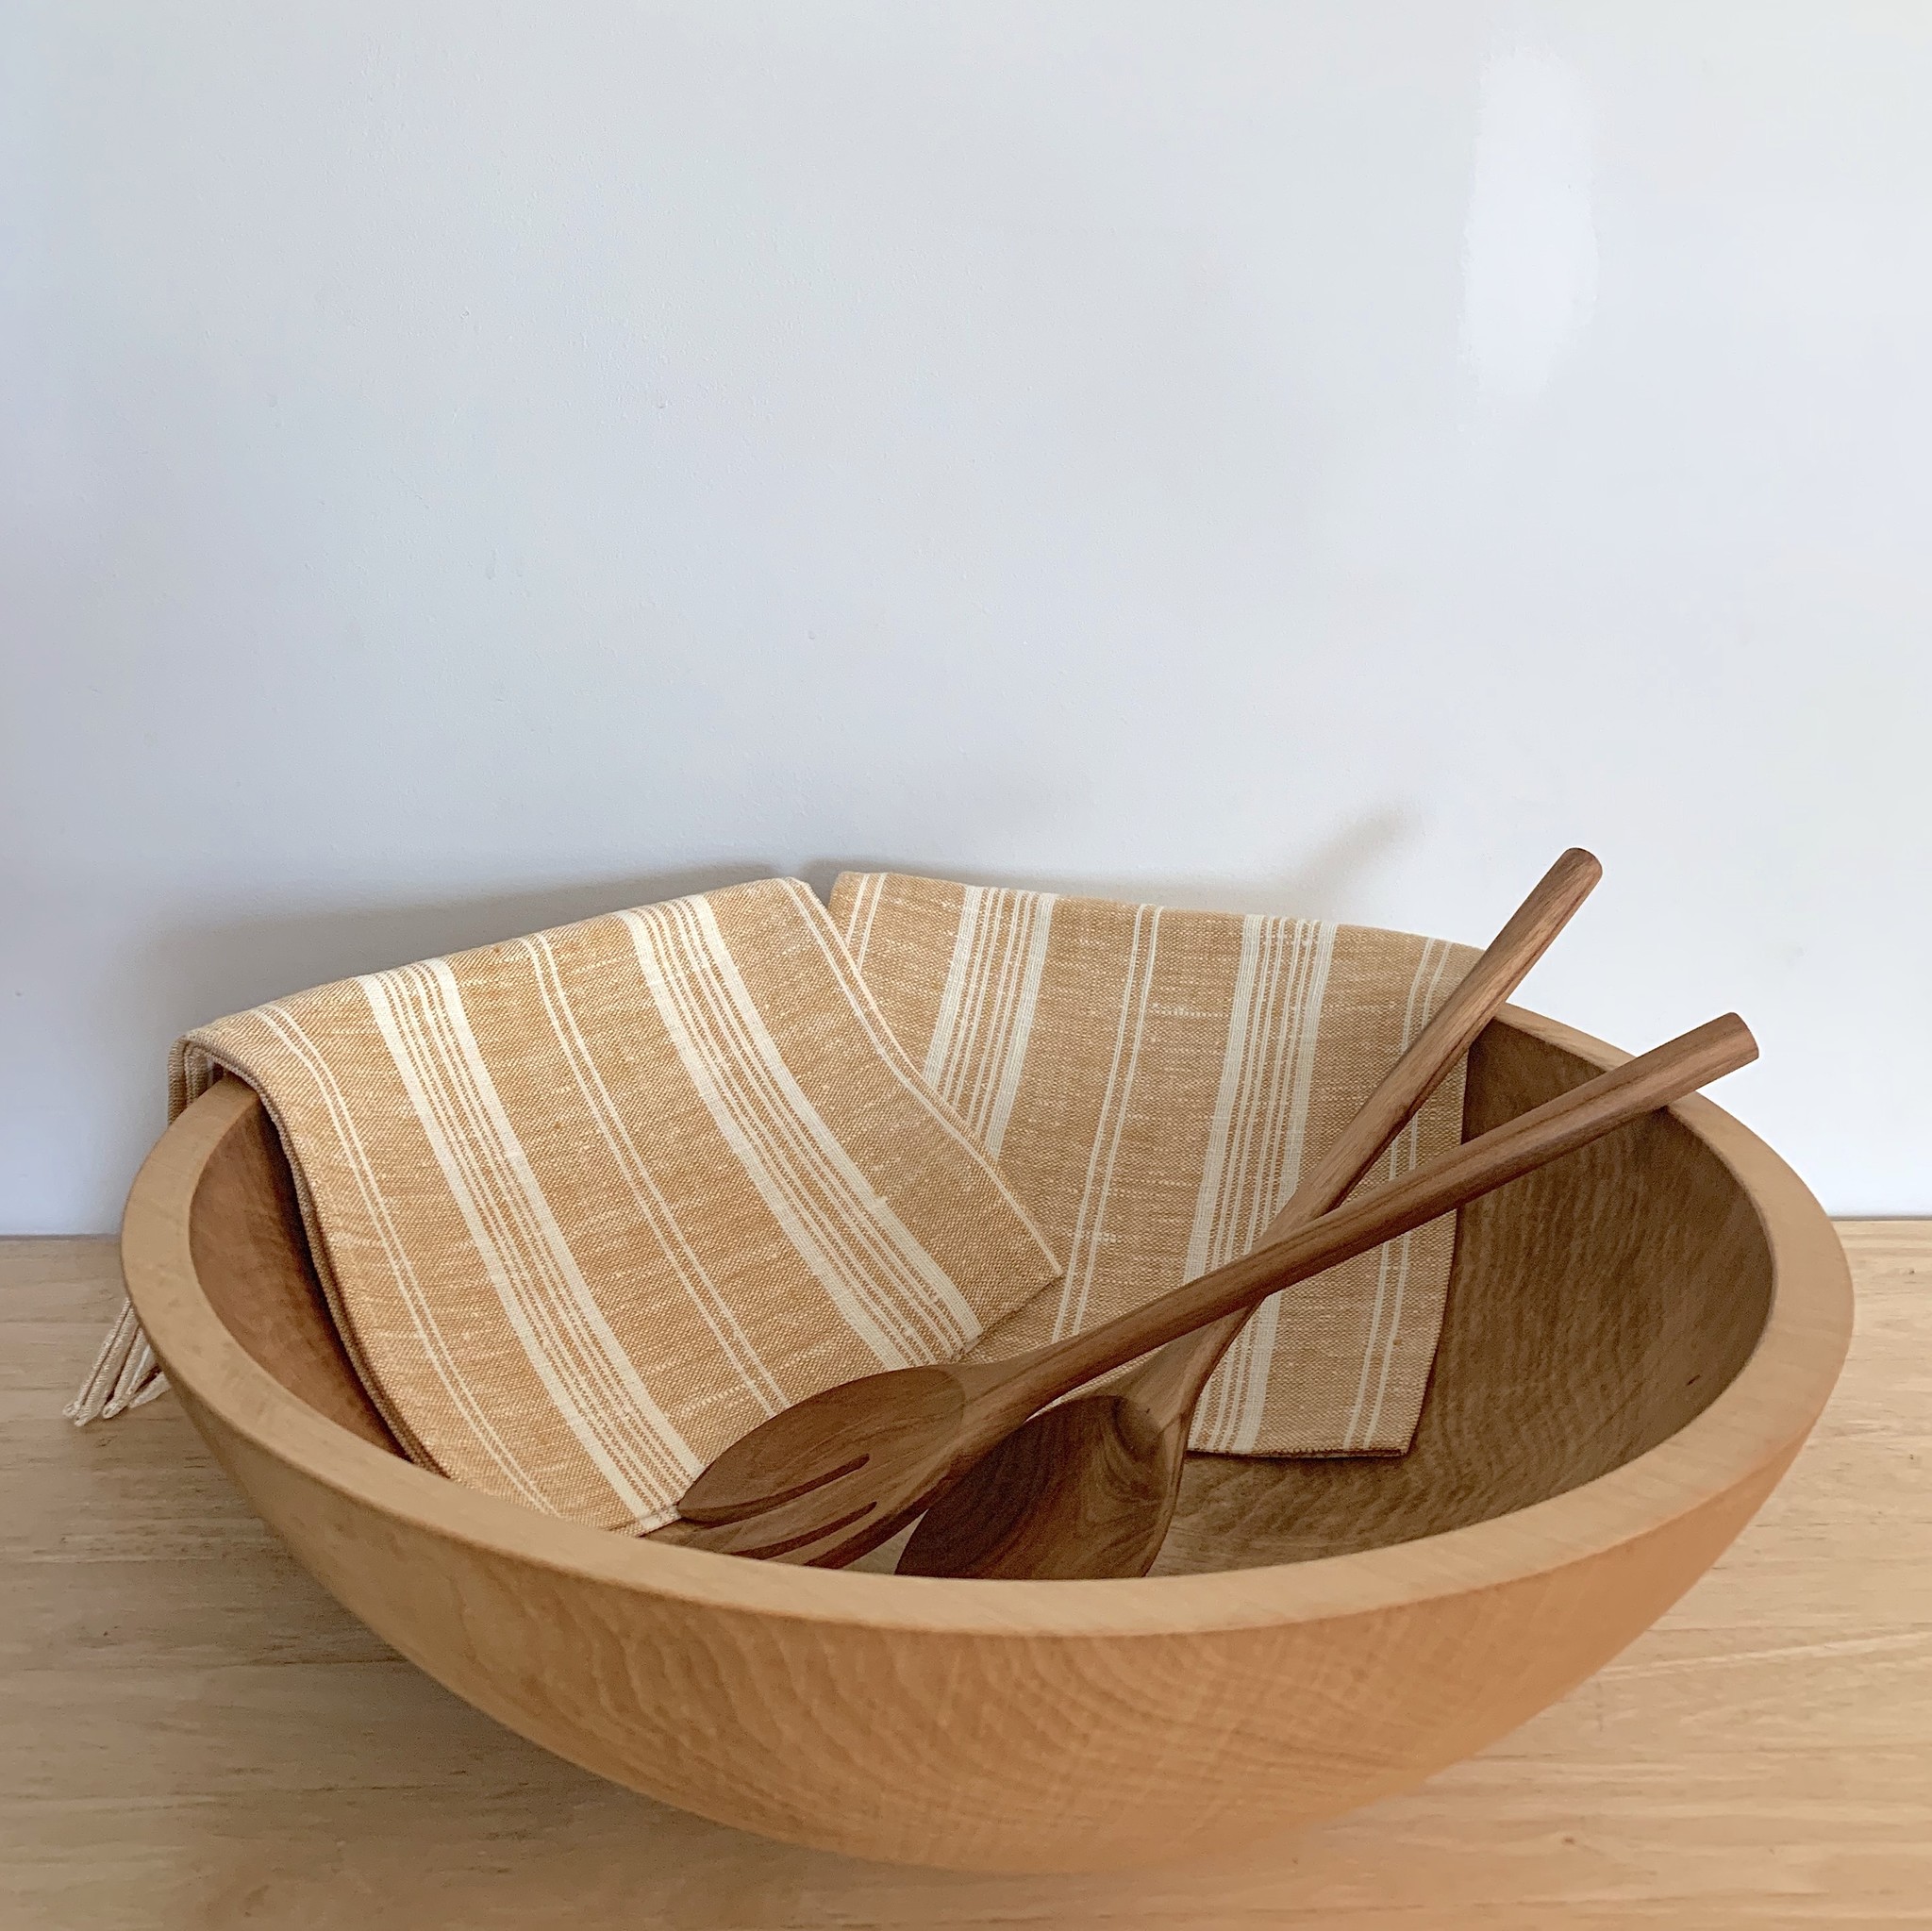 Solid Cherry Bowl, 20-inch with Bee's Oil Finish